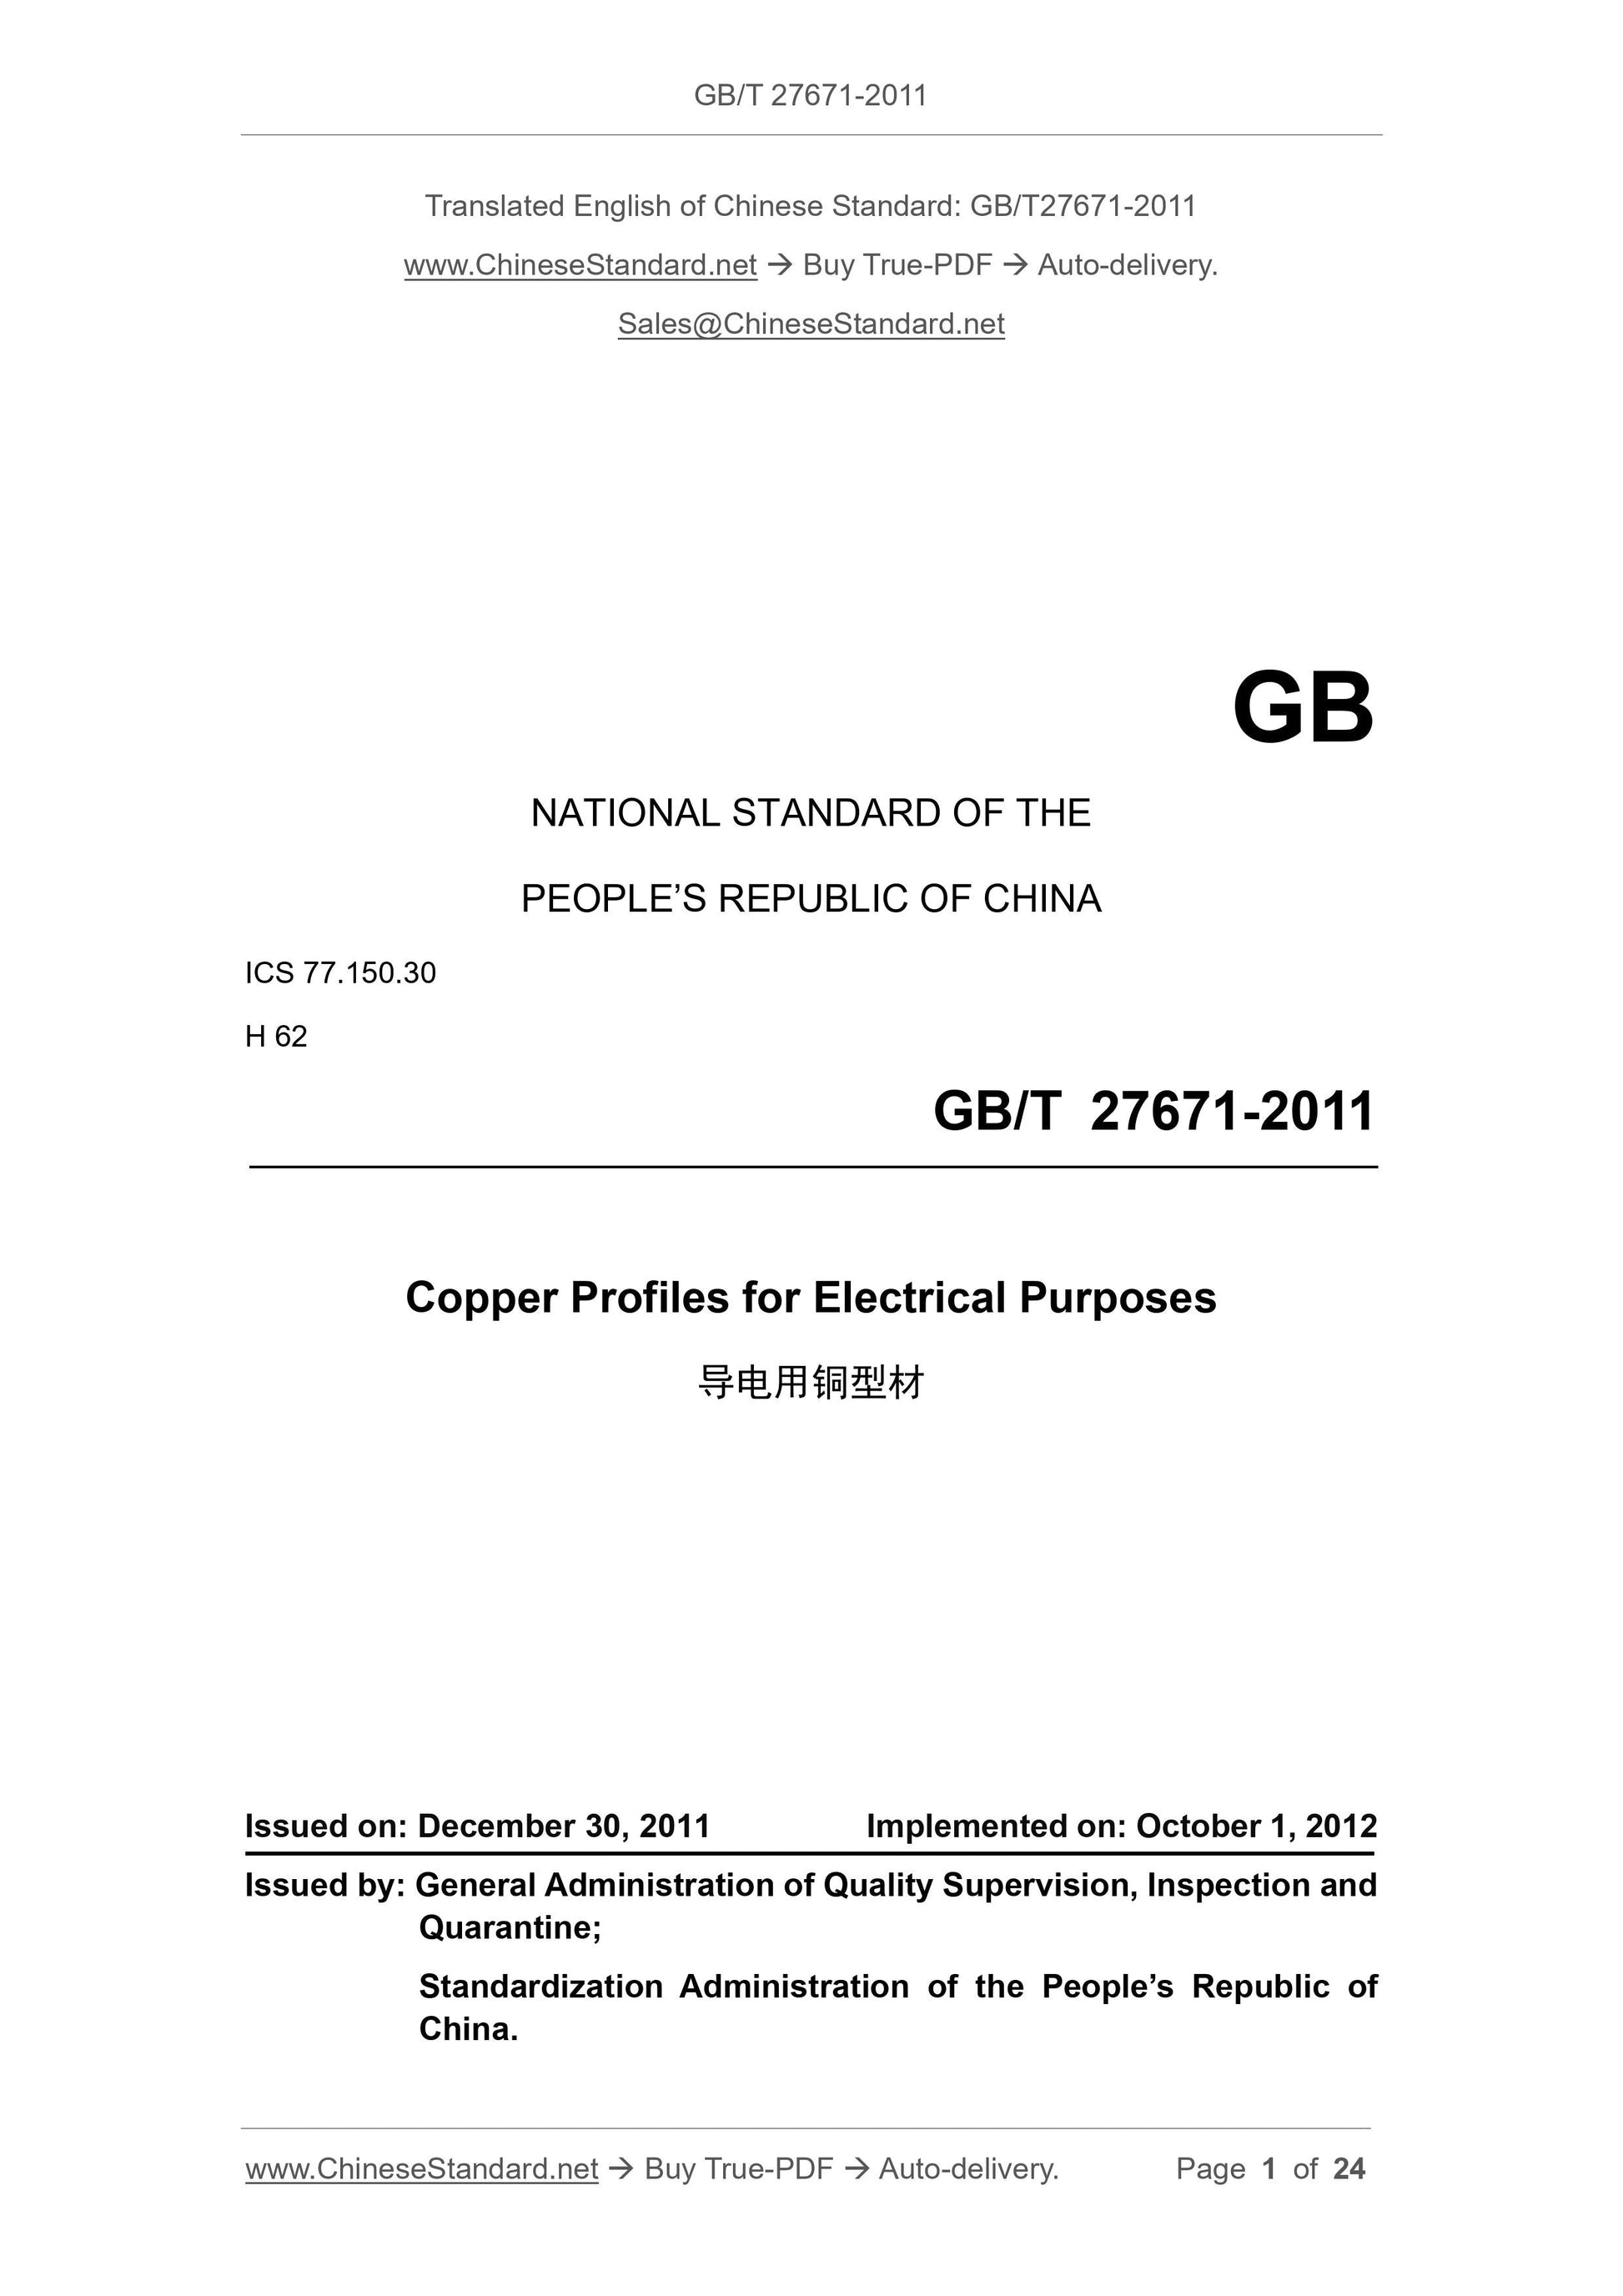 GB/T 27671-2011 Page 1